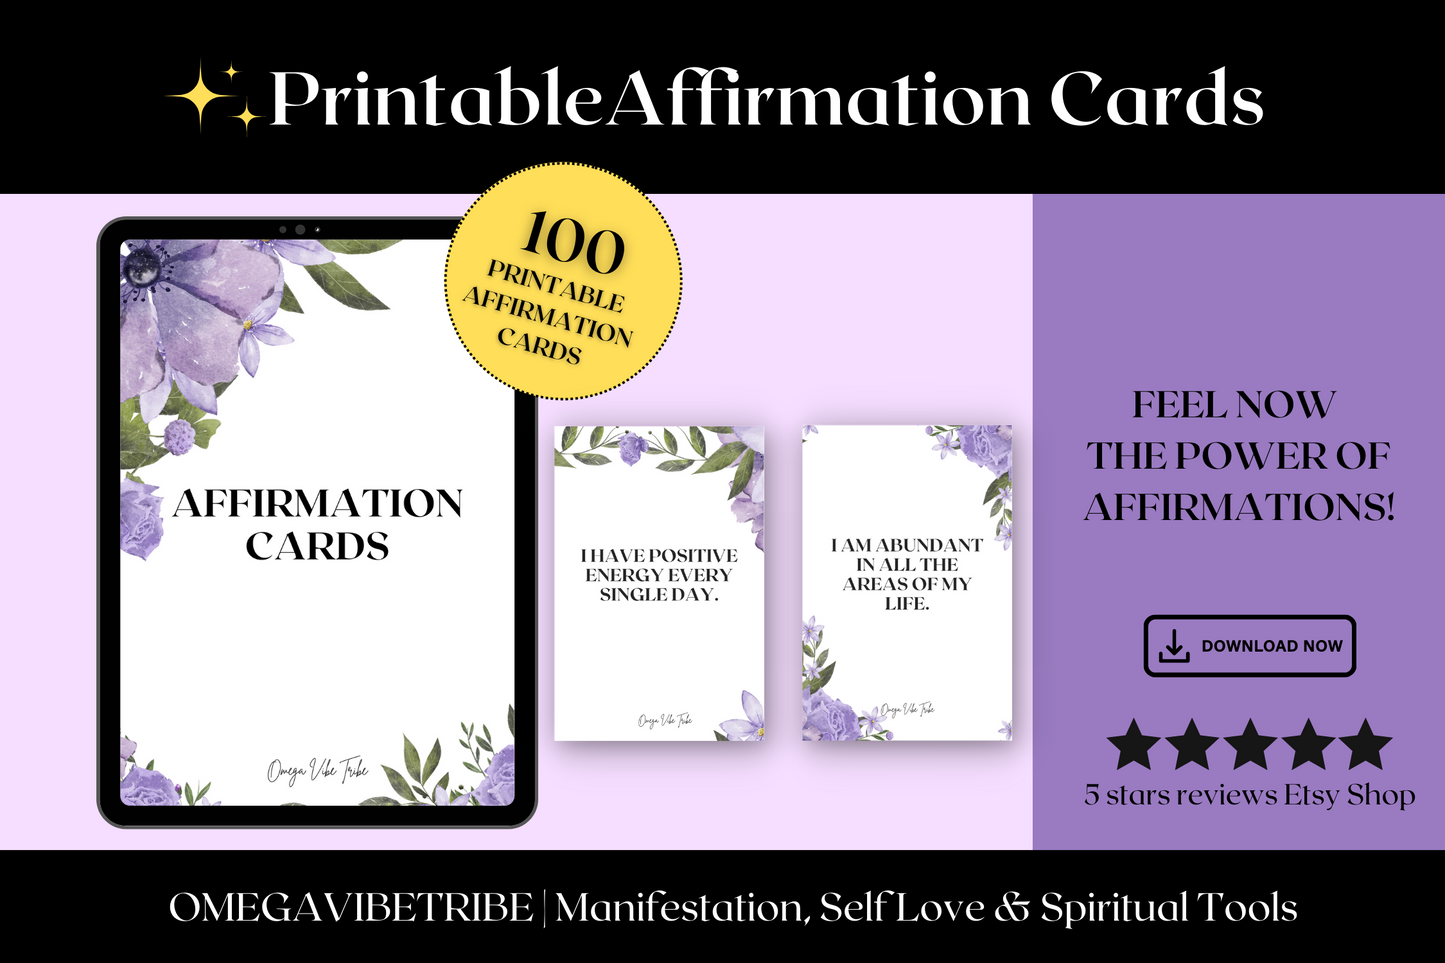 100 printable affirmation cards by omega vibe tribe